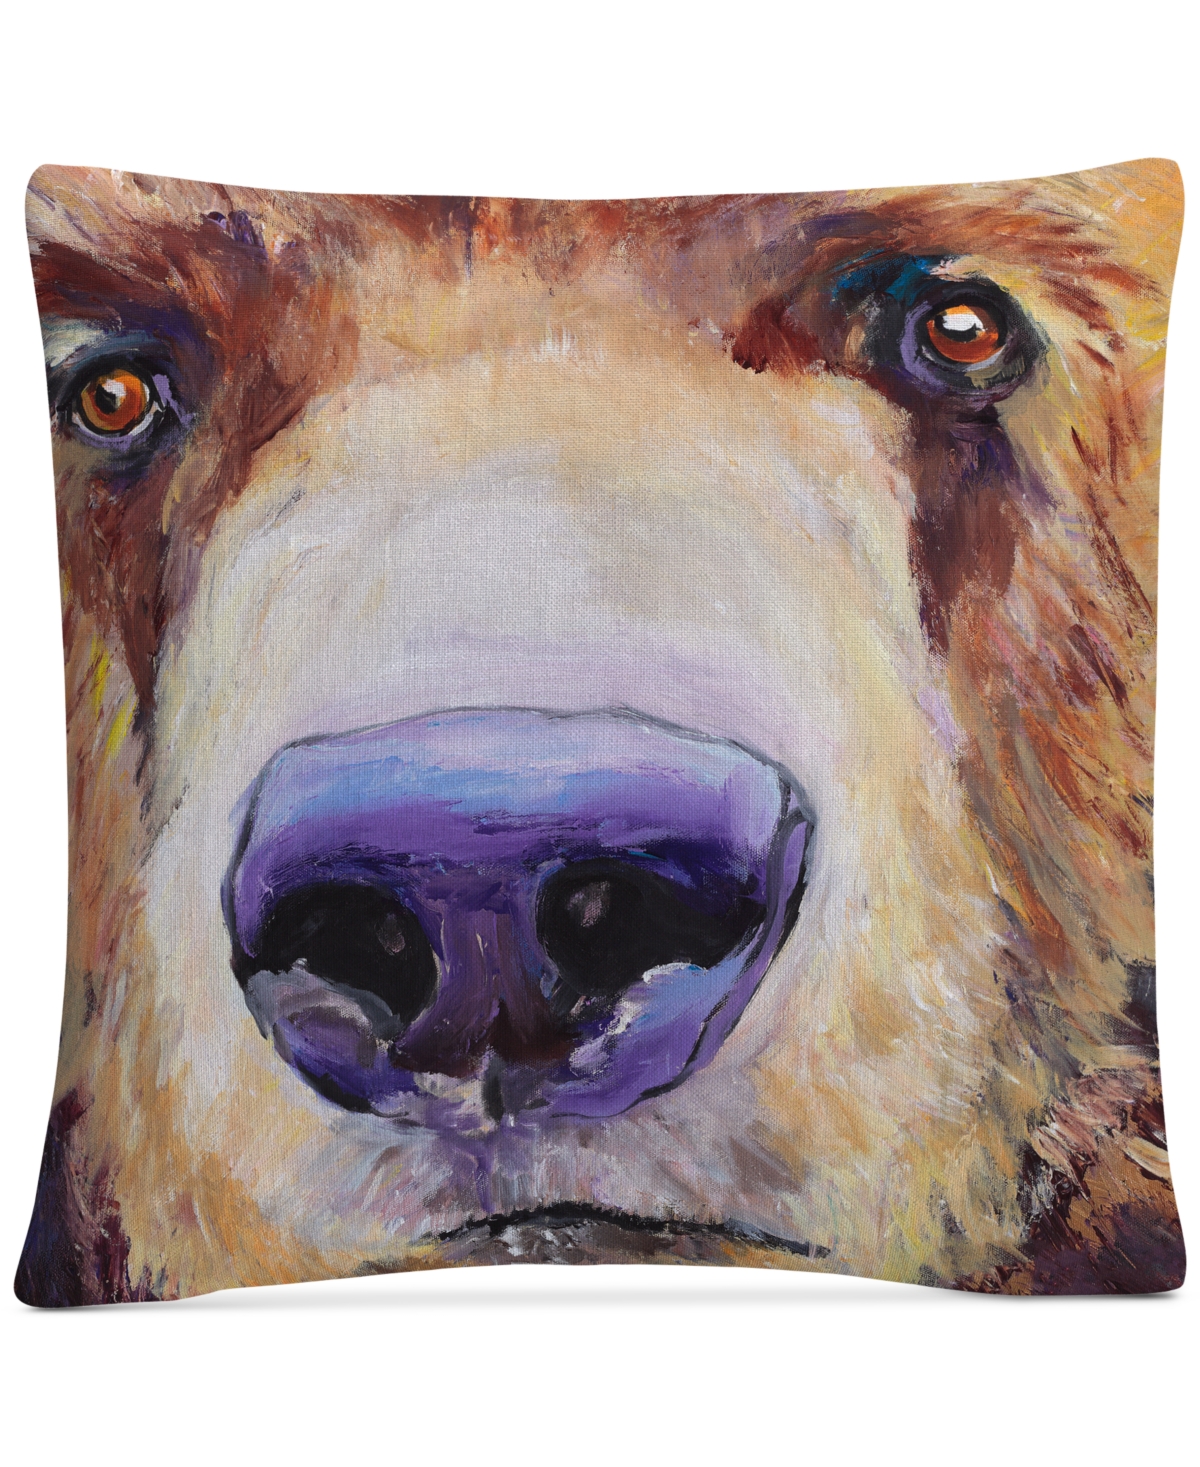 Pat Saunders-White The Sniffer Decorative Pillow, 16 x 16